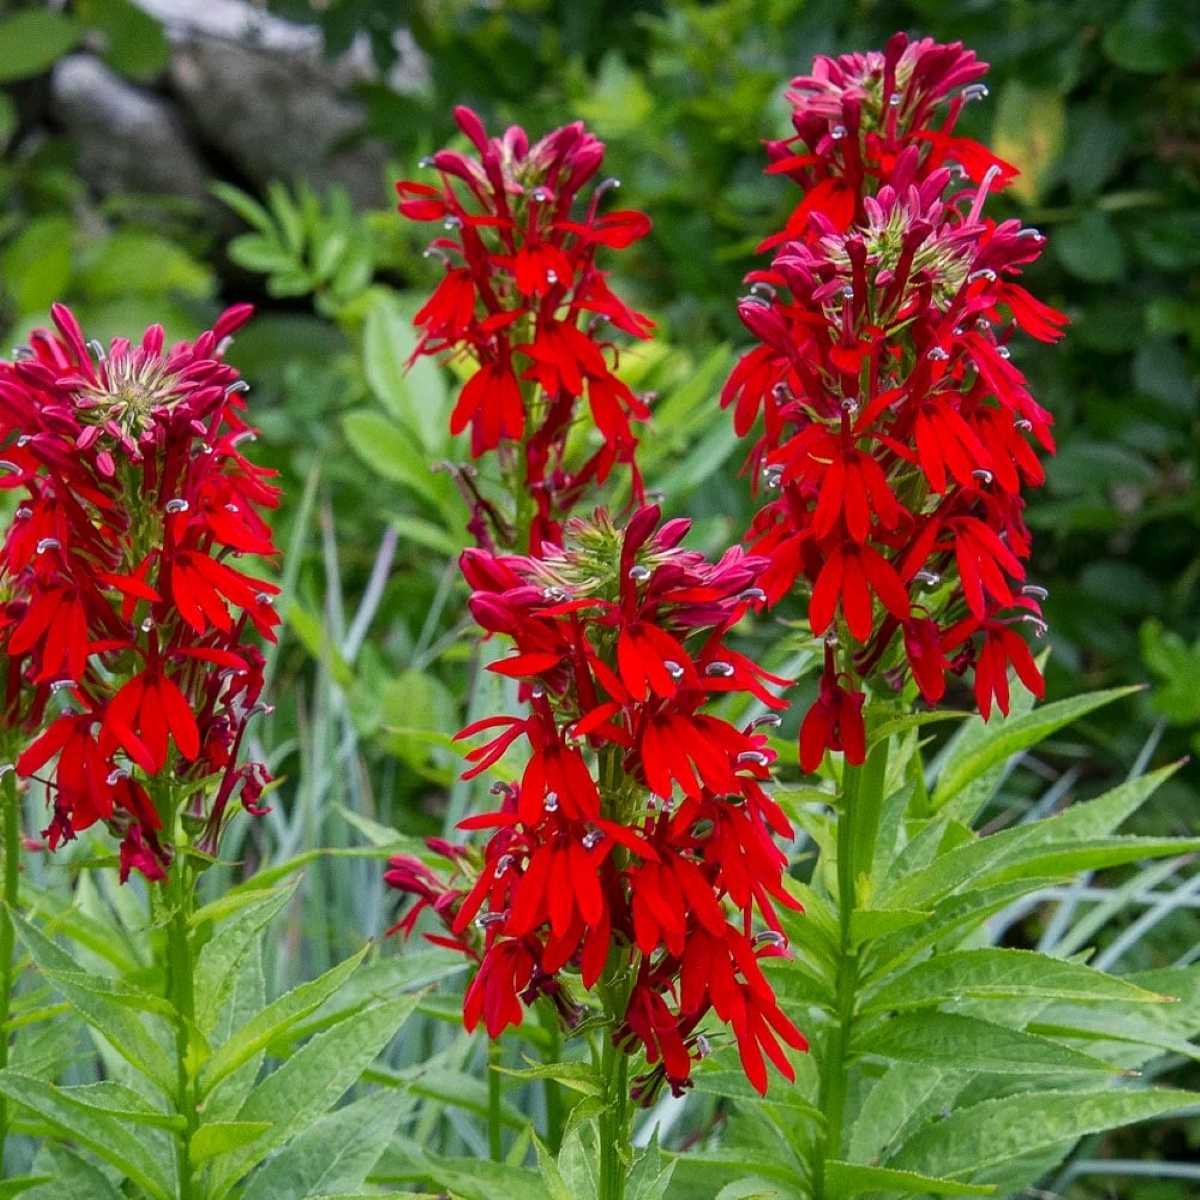 Tall plant with bright red flowers.